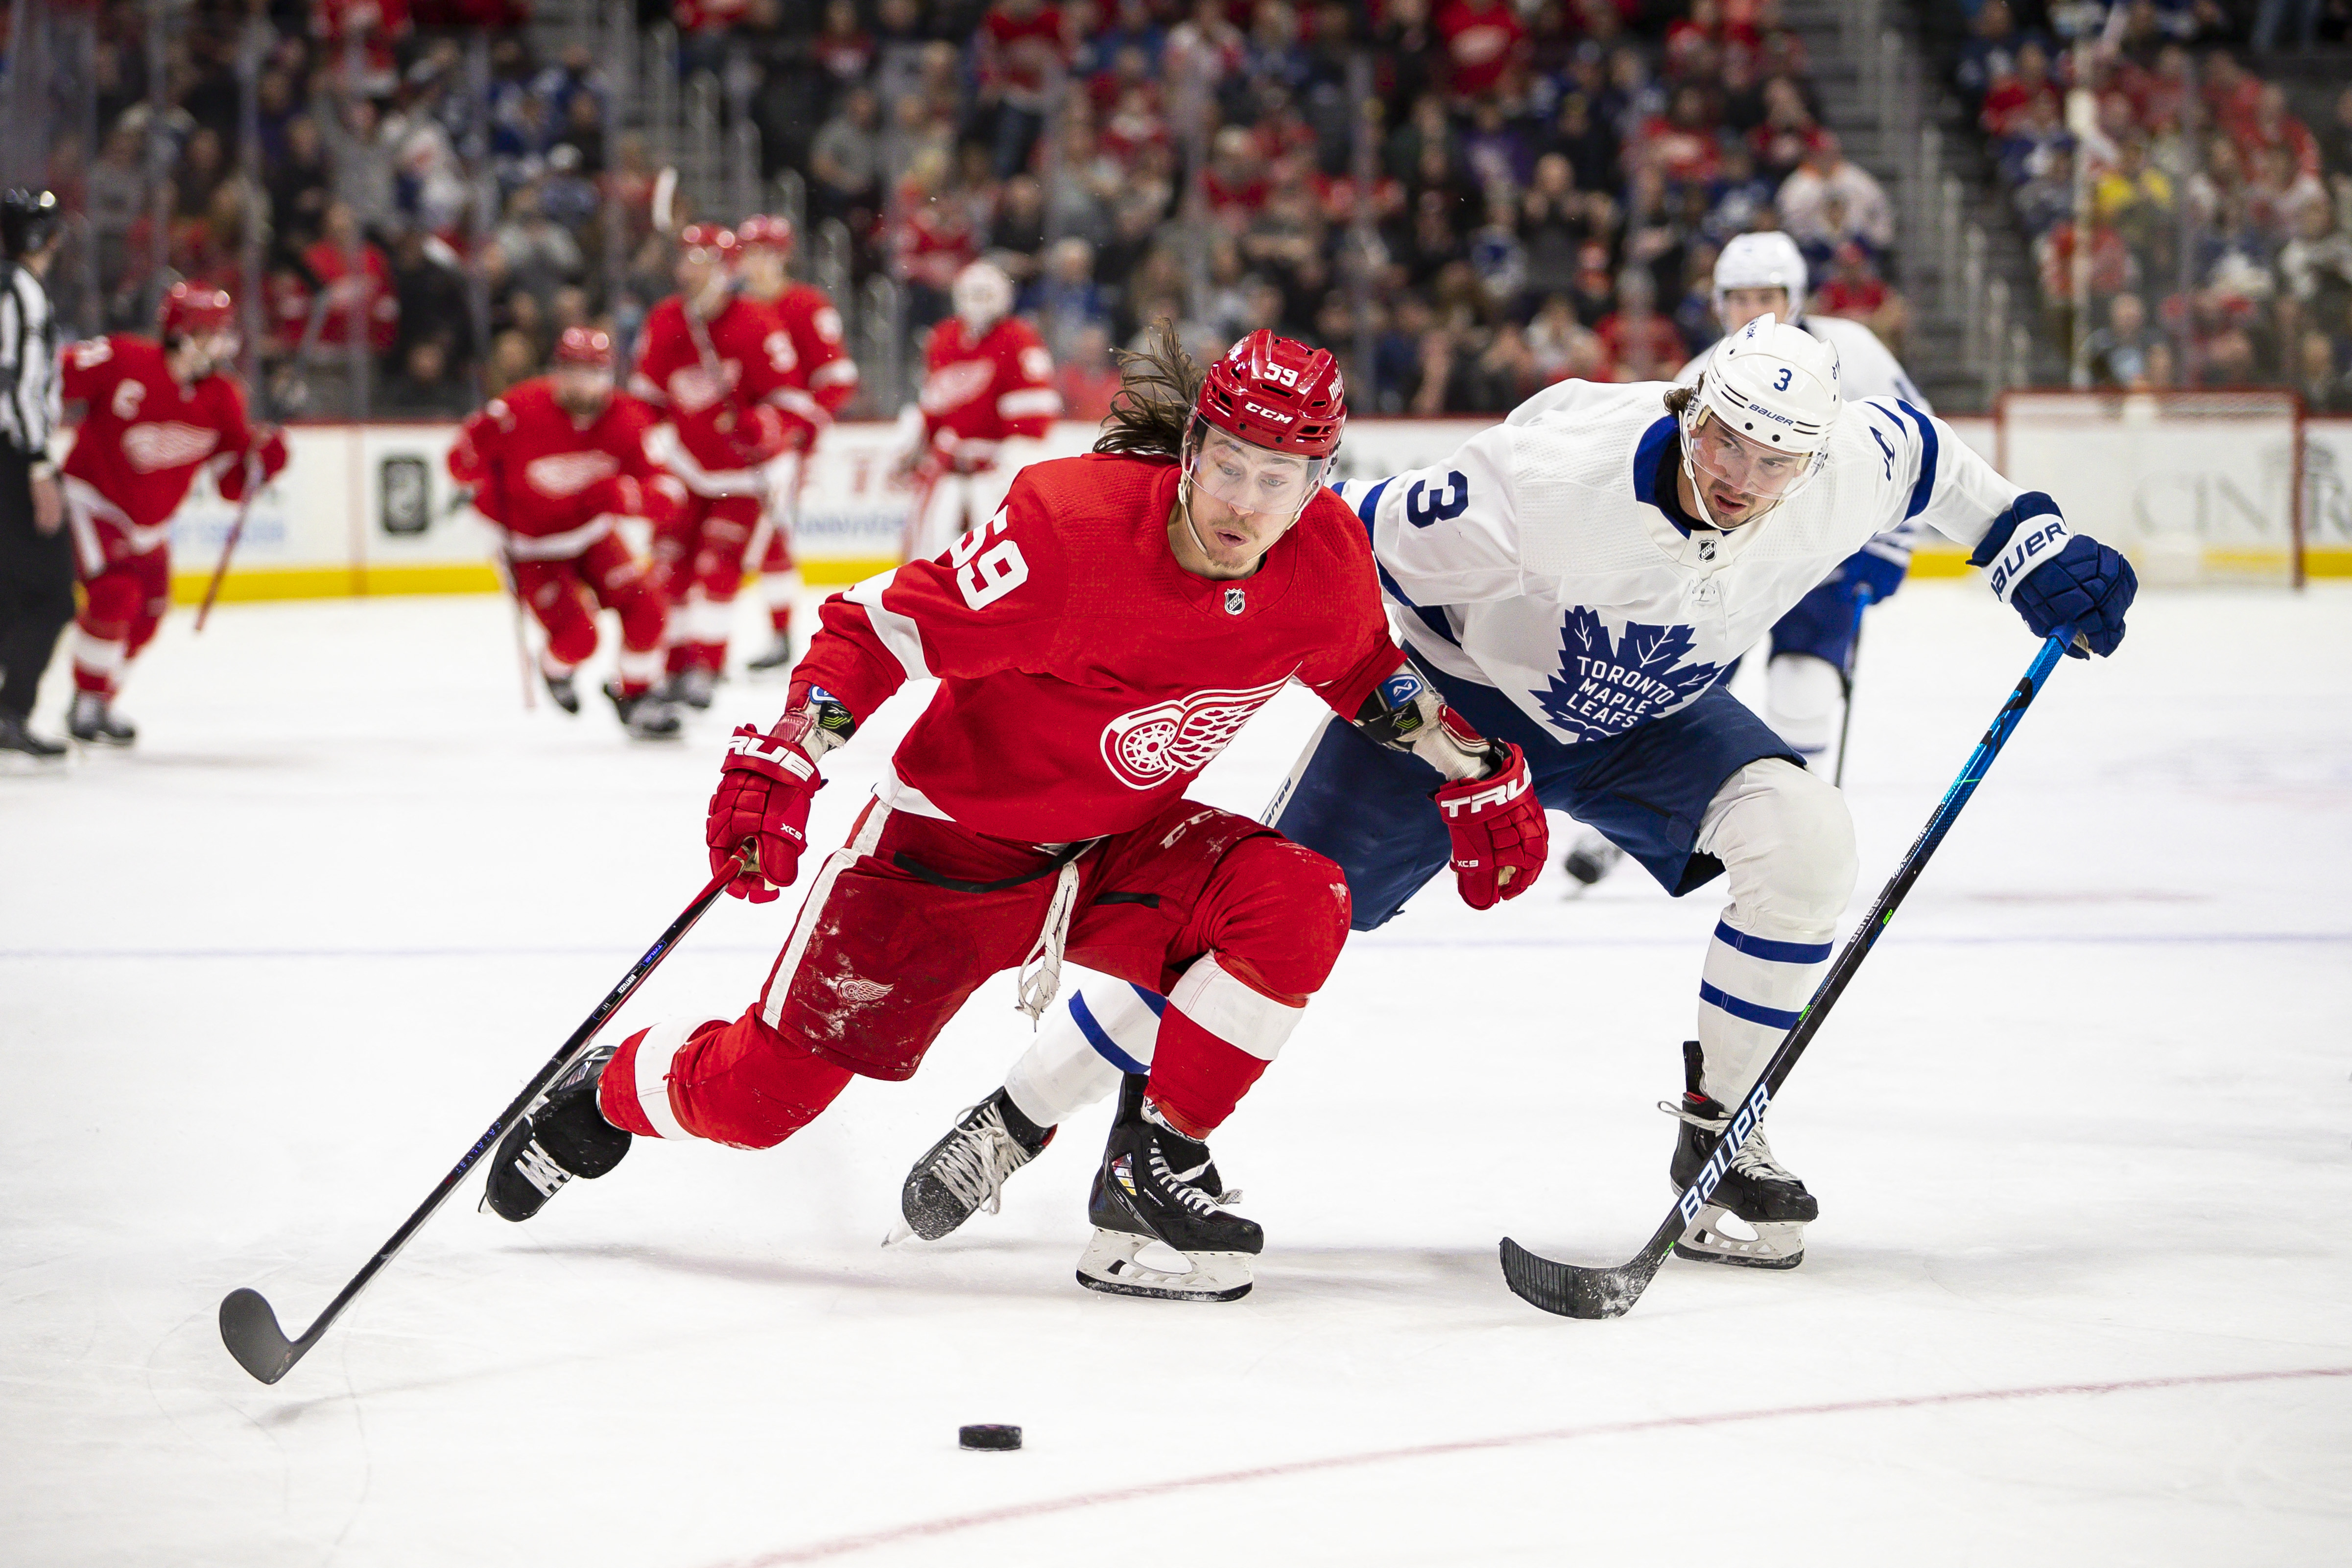 Detroit Red Wings mount a huge comeback against the Toronto Maple